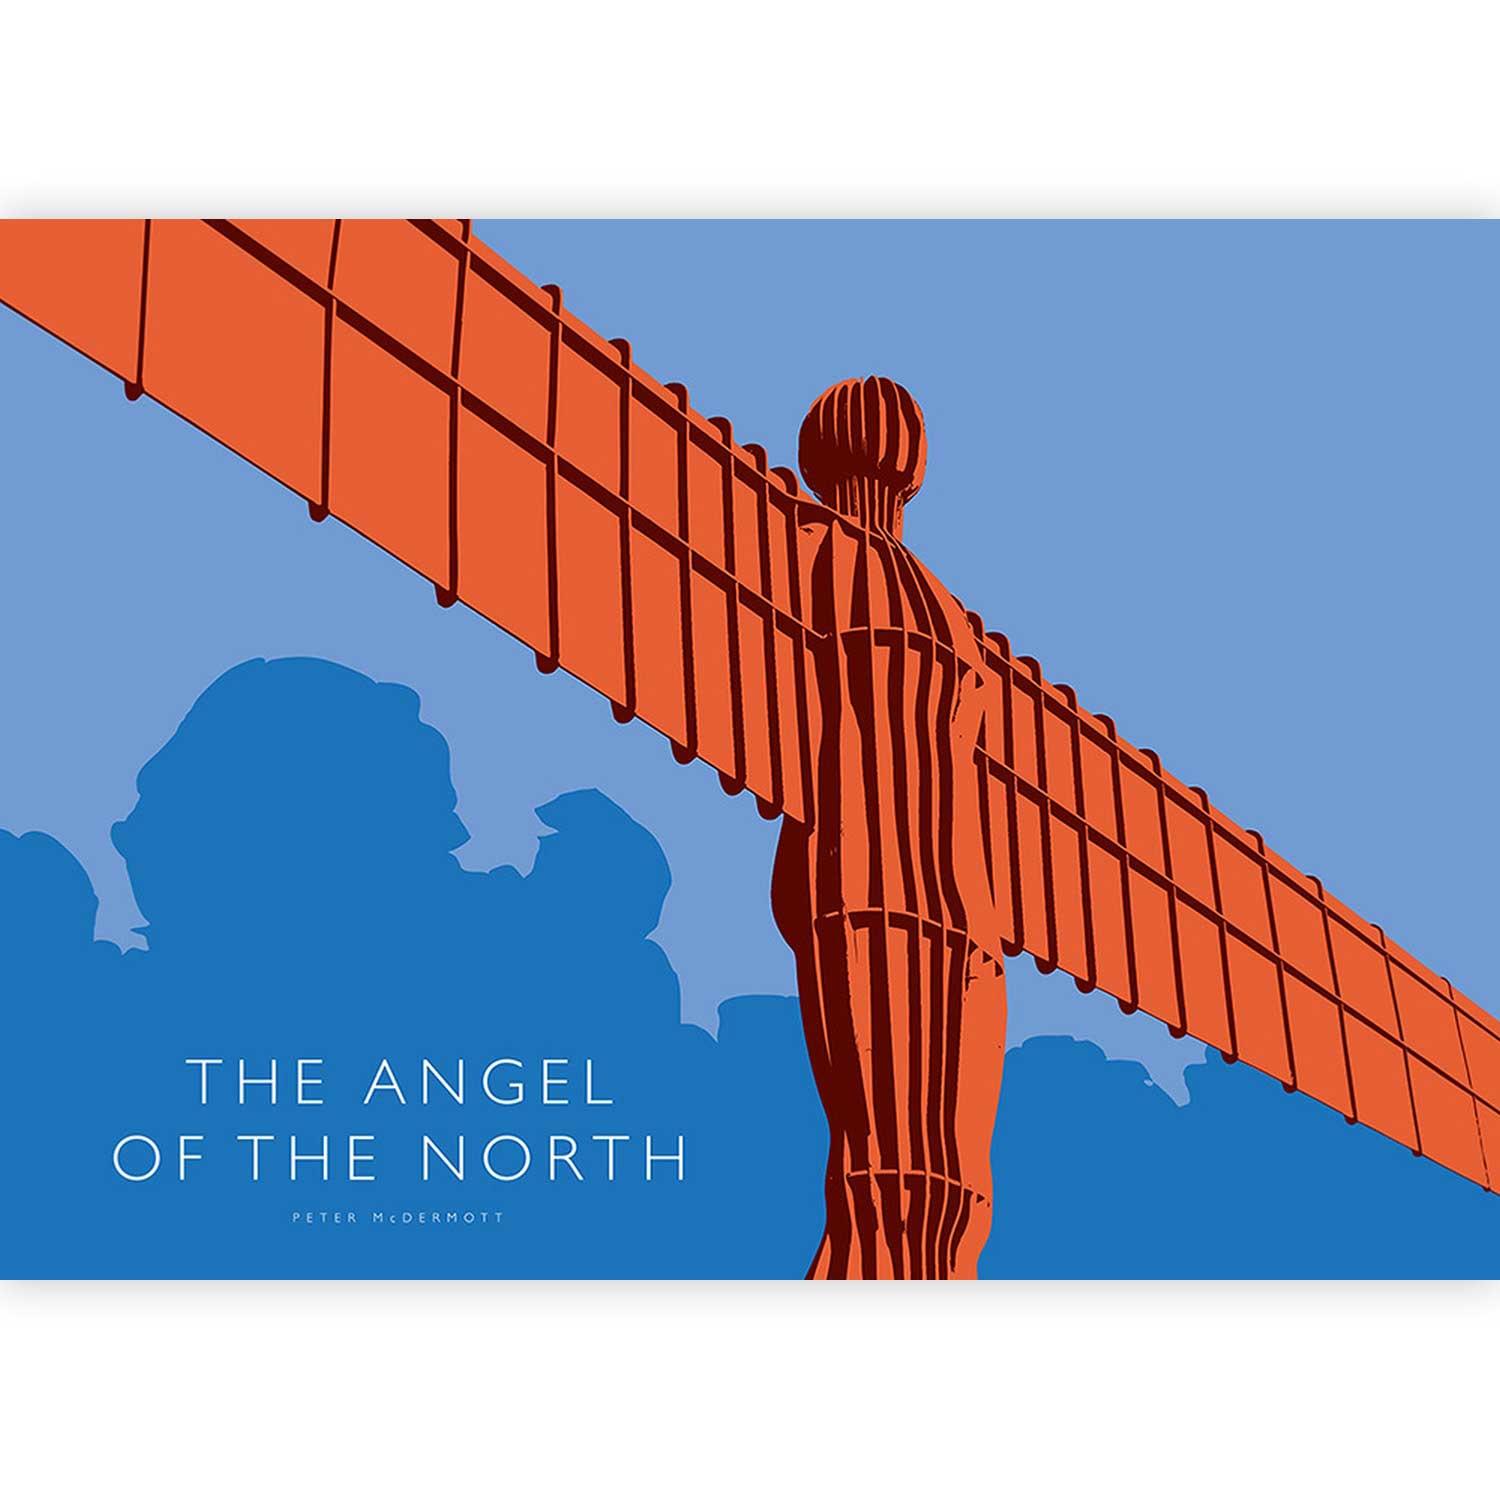 The Angel of the North by Peter McDermott